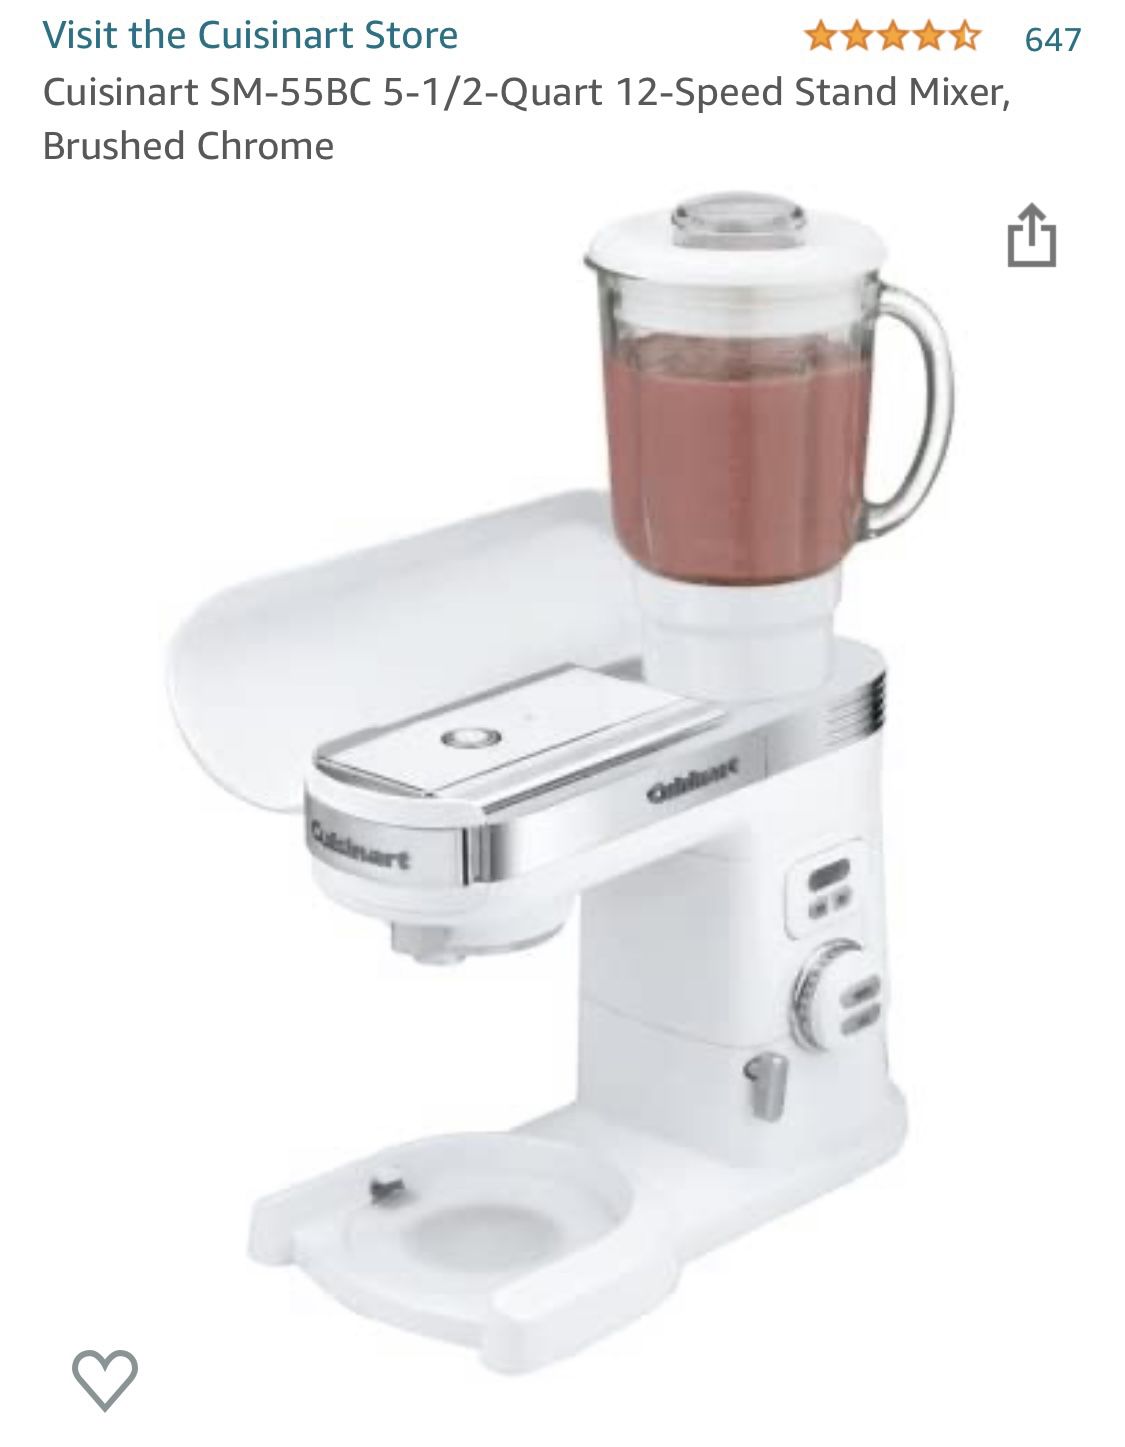 Brand New 7 Speed Cuisinart Hand Mixer for Sale in Portland, OR - OfferUp